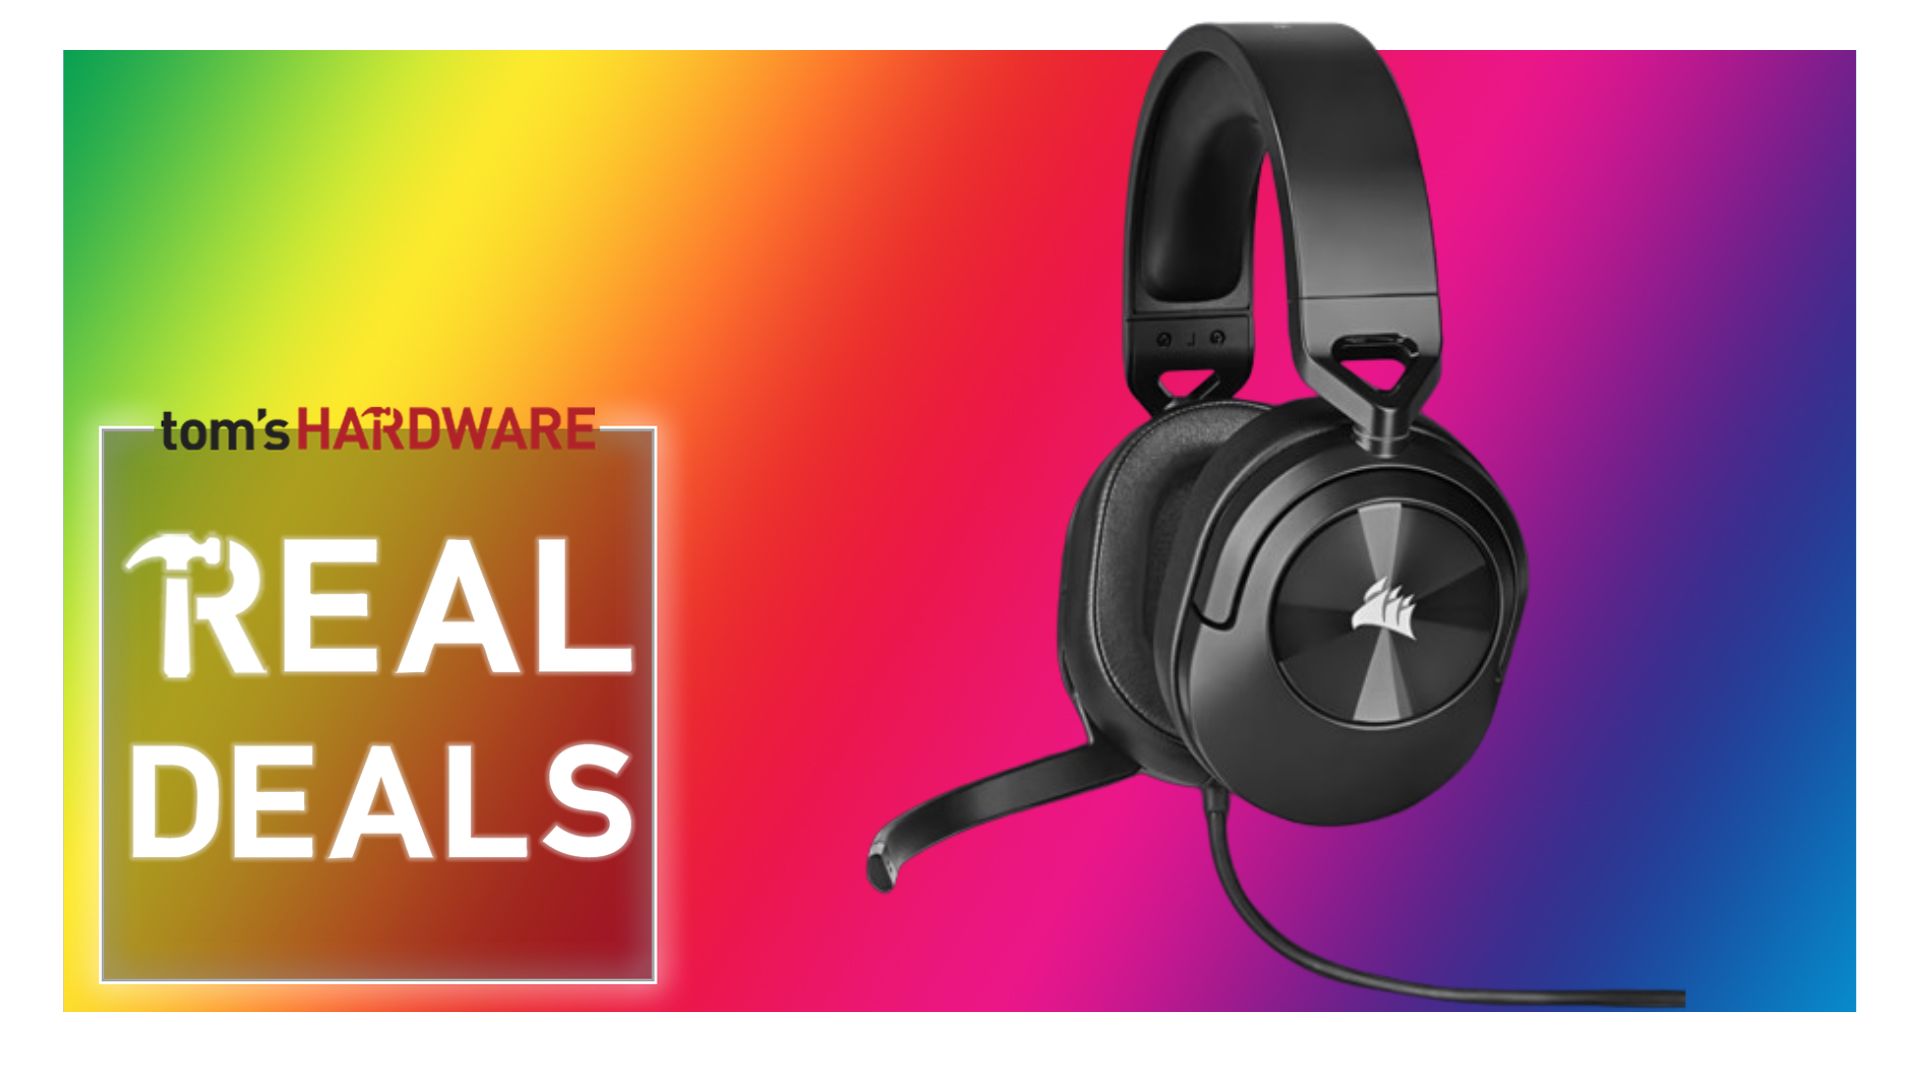 Grab Corsair's fantastic HS55 stereo gaming headset for only $39 — a touch of quality for a great price